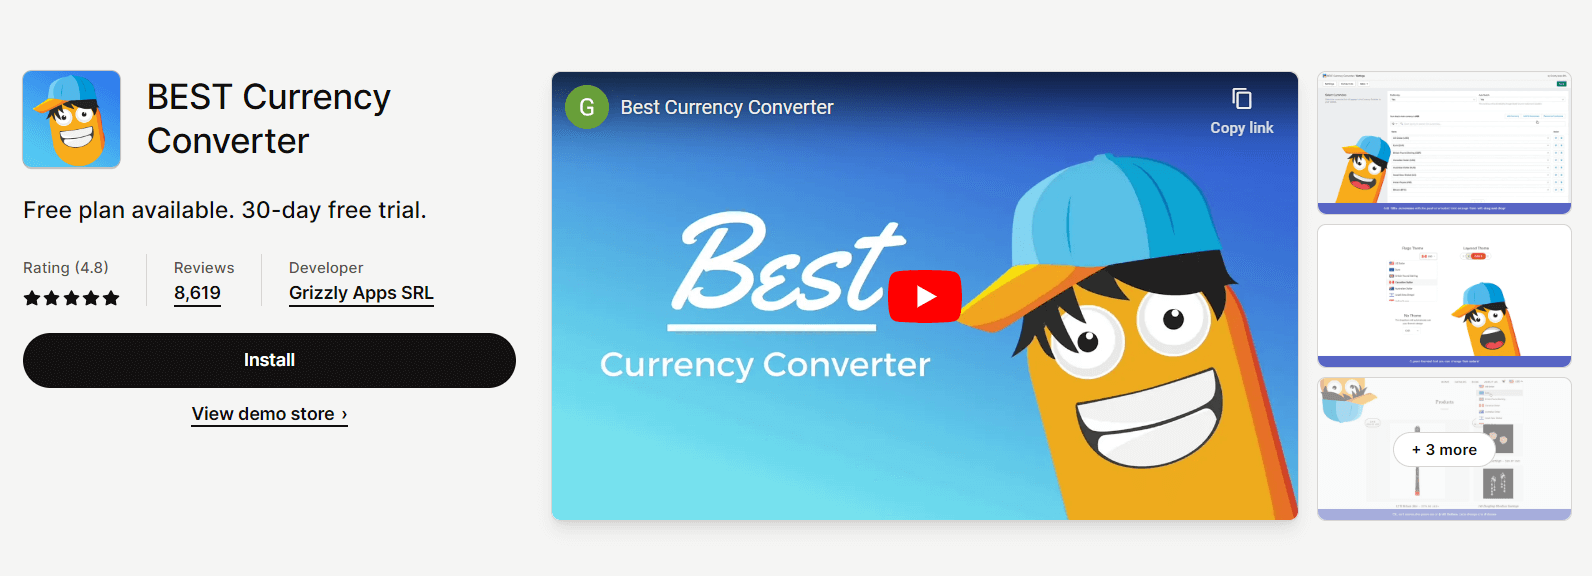 BEST Currency Converter - Currency Converter Apps